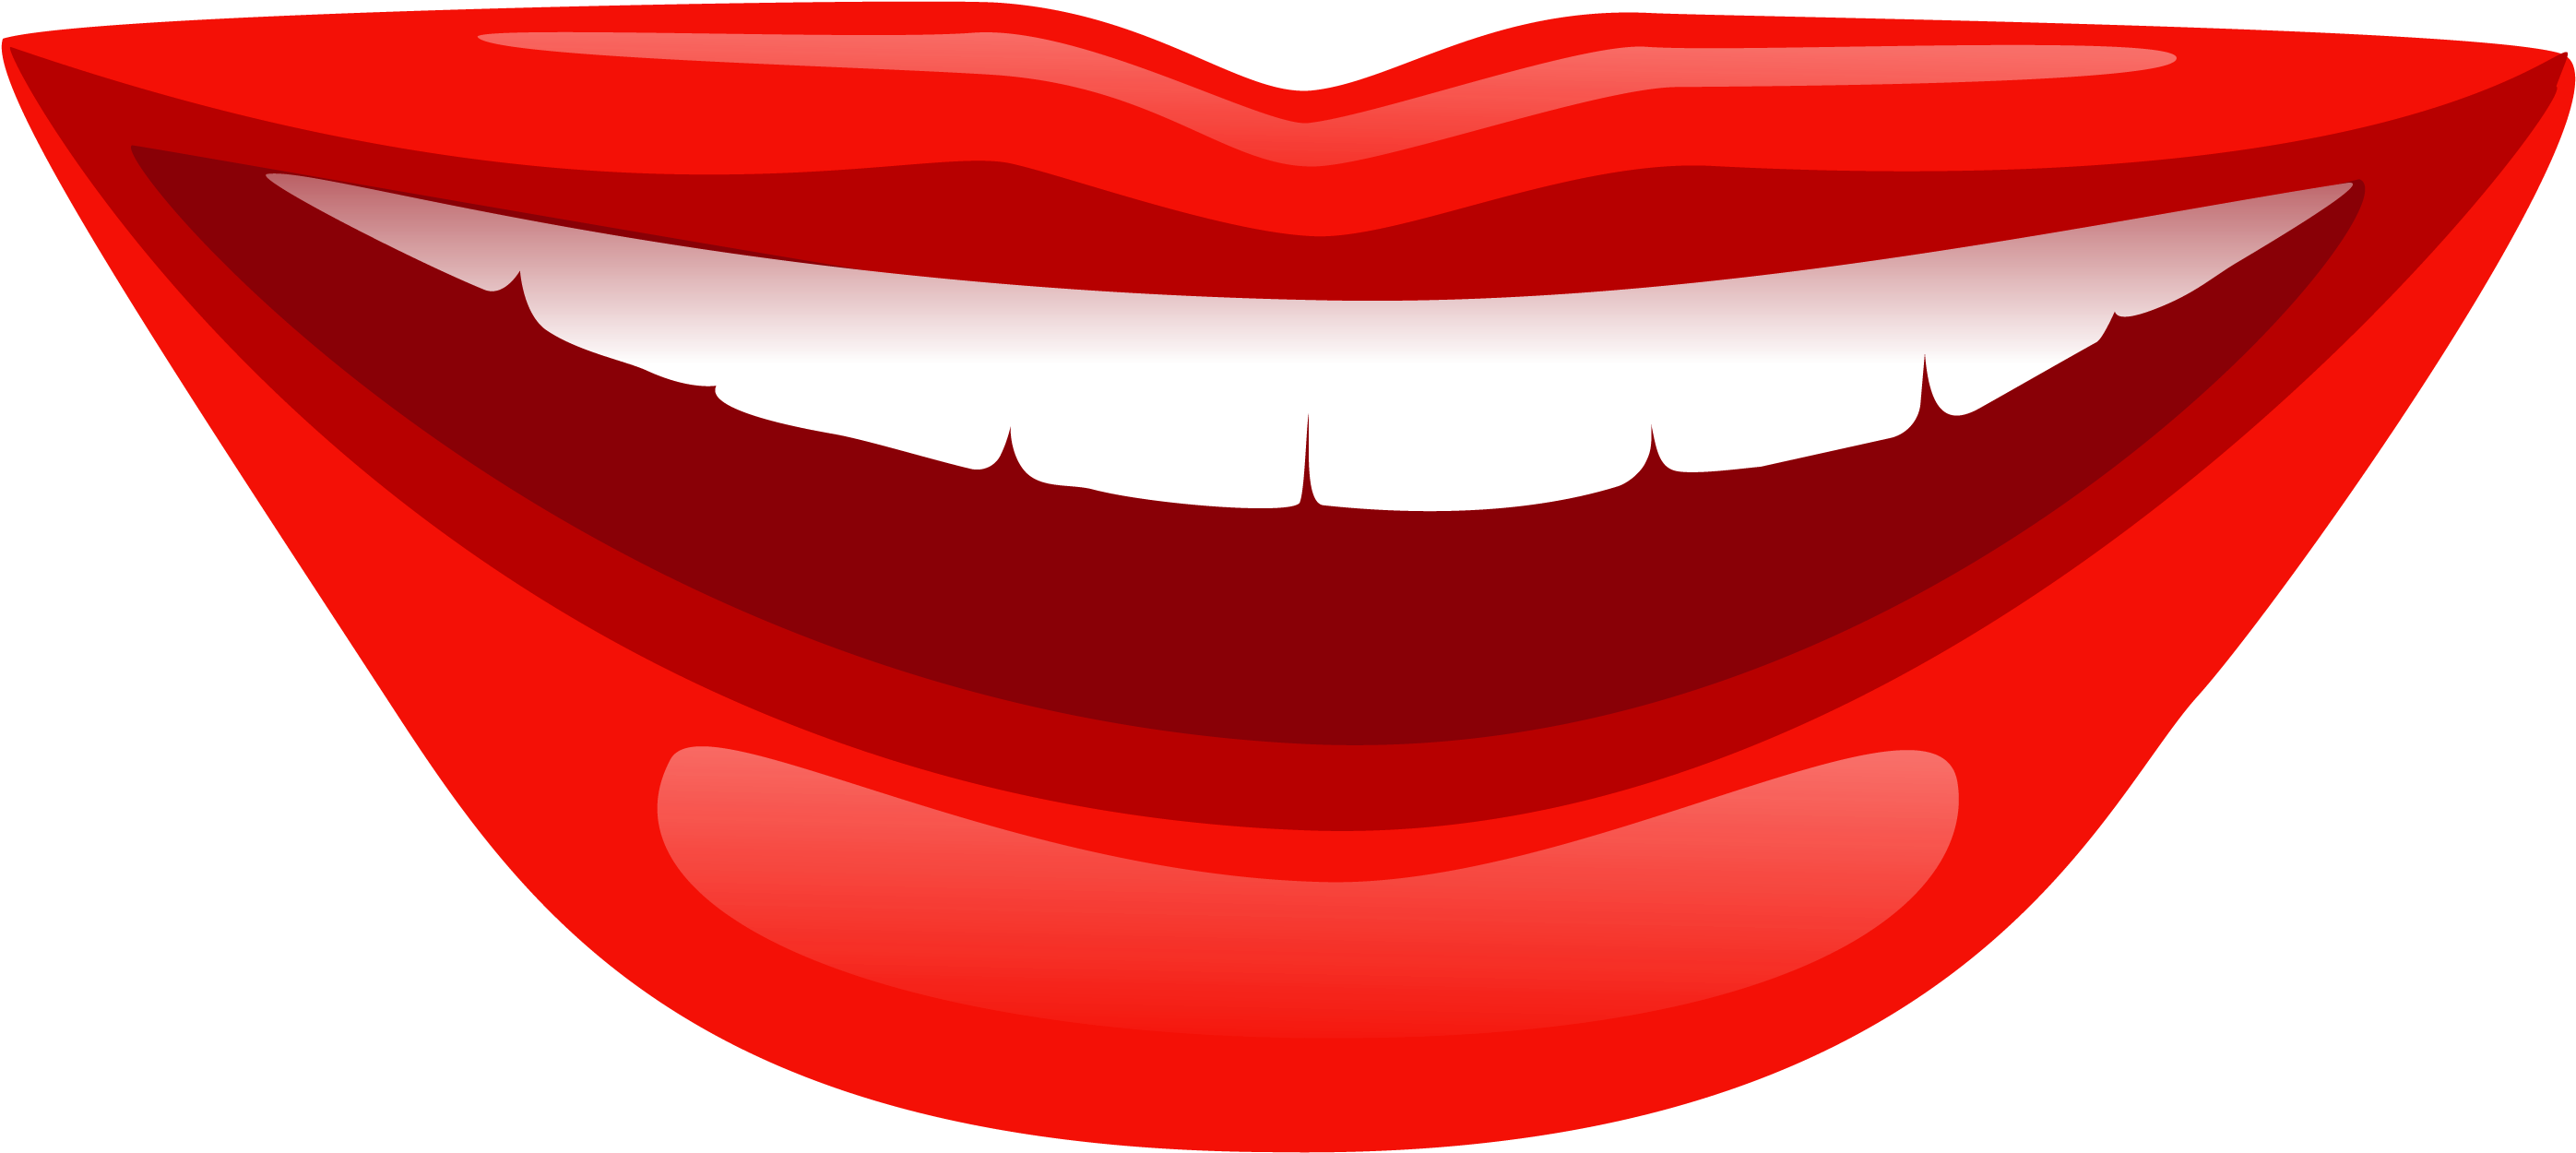 Anime Mouth Transparent Image